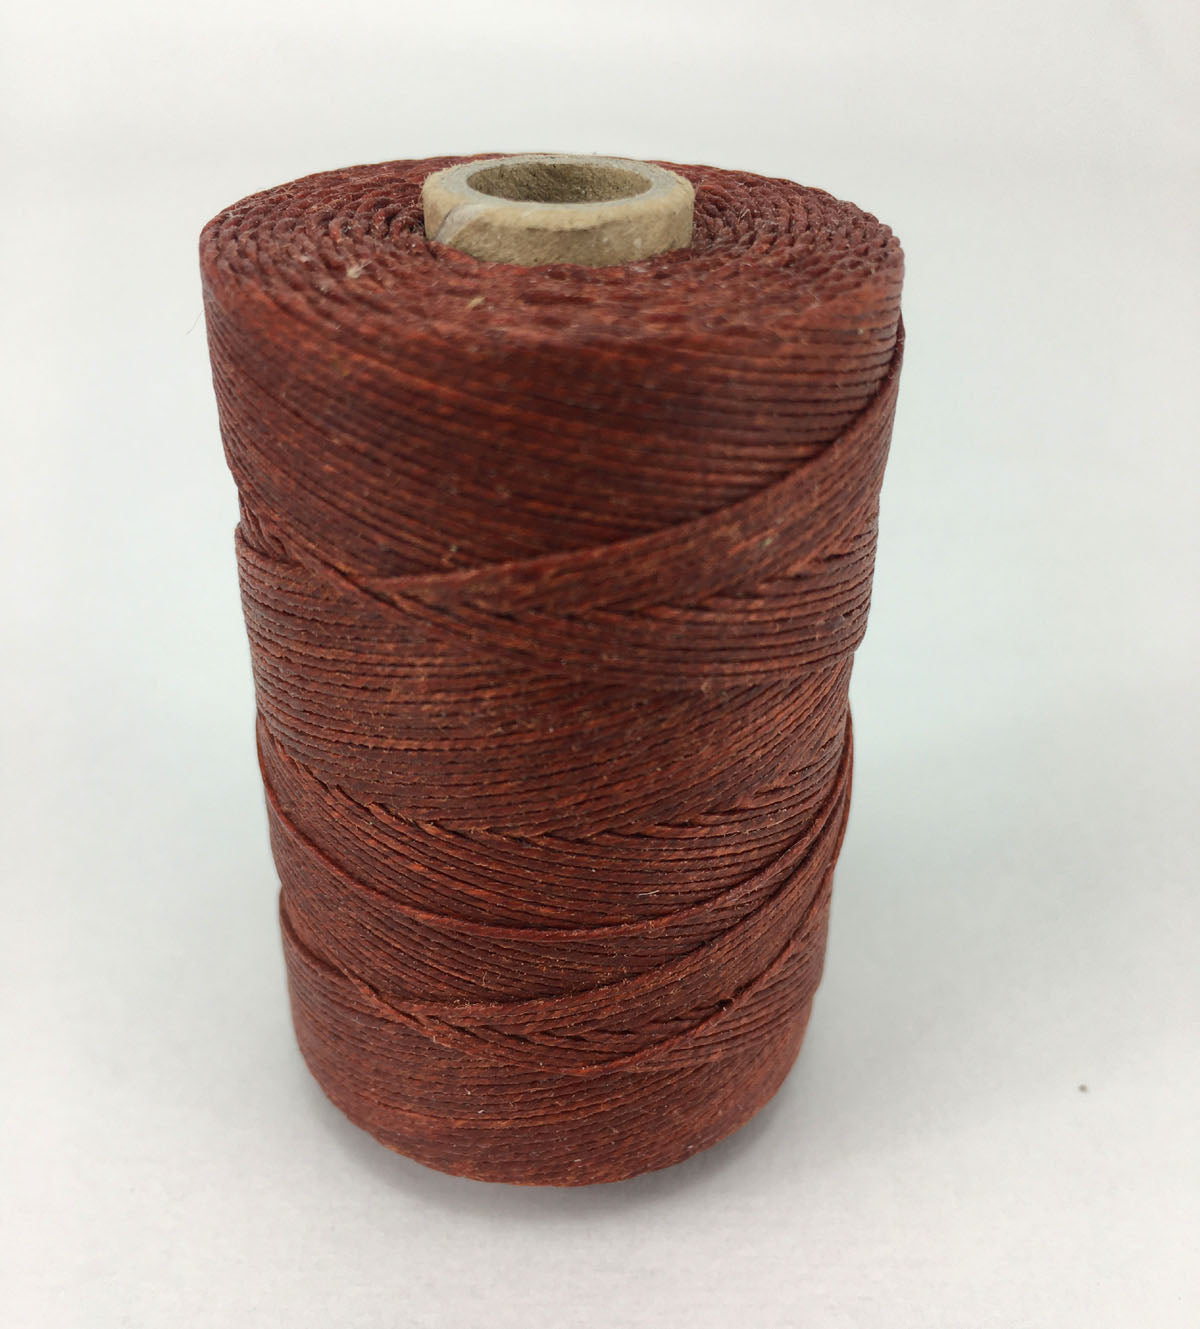 Settle Brown- Per spool 50g- 100% Pure Linen Thread- Waxed- 18/3 No.18 Cord 3- Approx 0.55mm thick